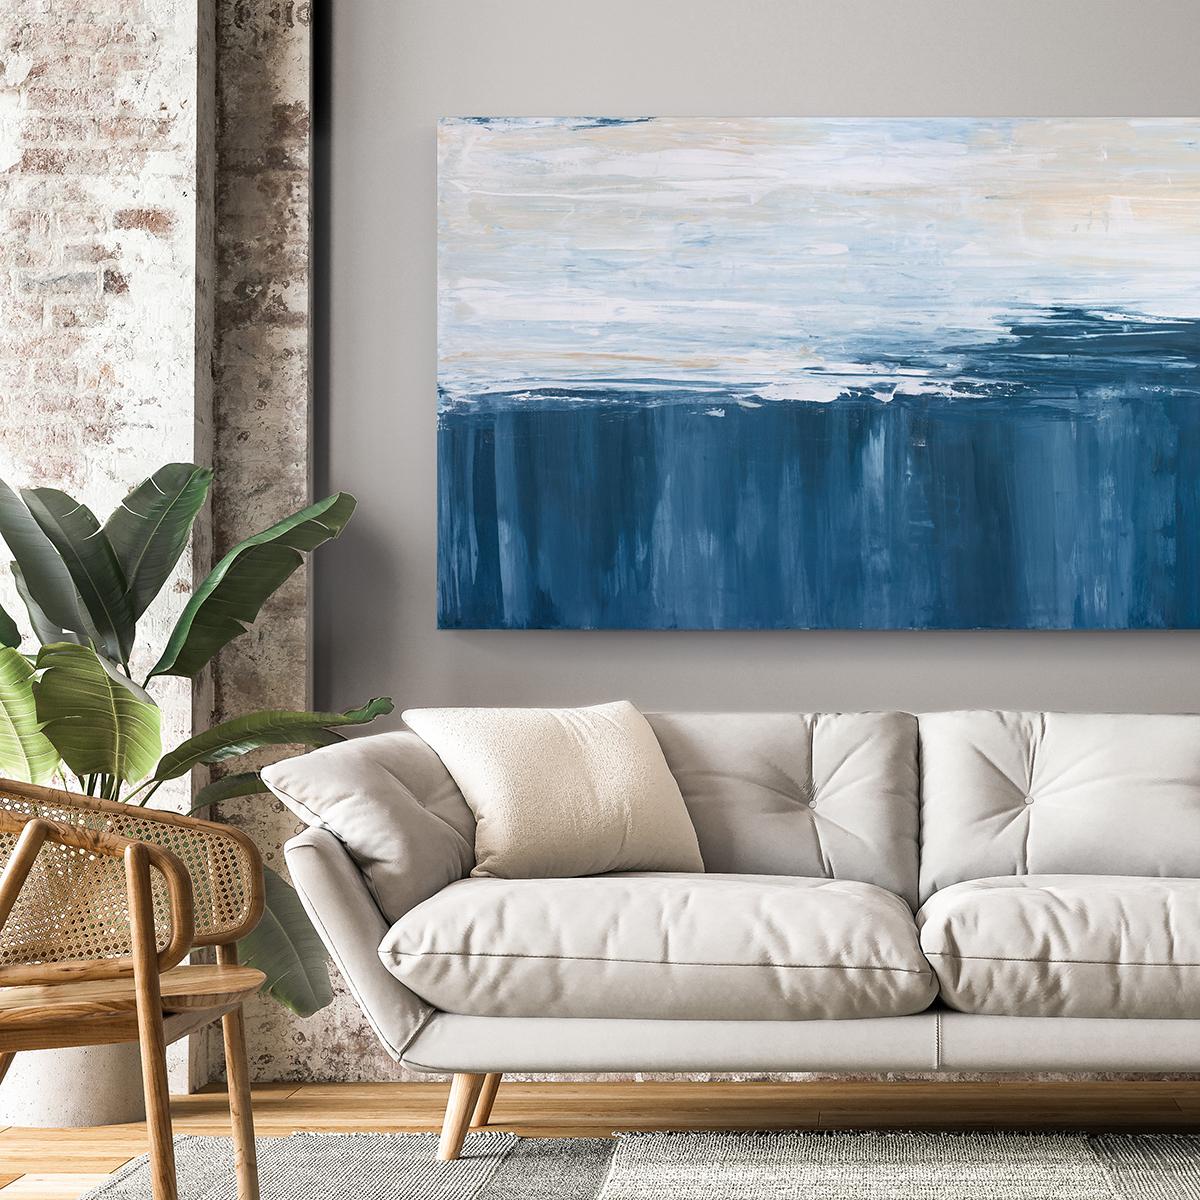 This large abstract statement painting by Julia Contacessi features a cool palette with deep blue on the bottom half of the composition, and white and neutral tones layered in strokes across the top half of the piece. This abstract painting is made